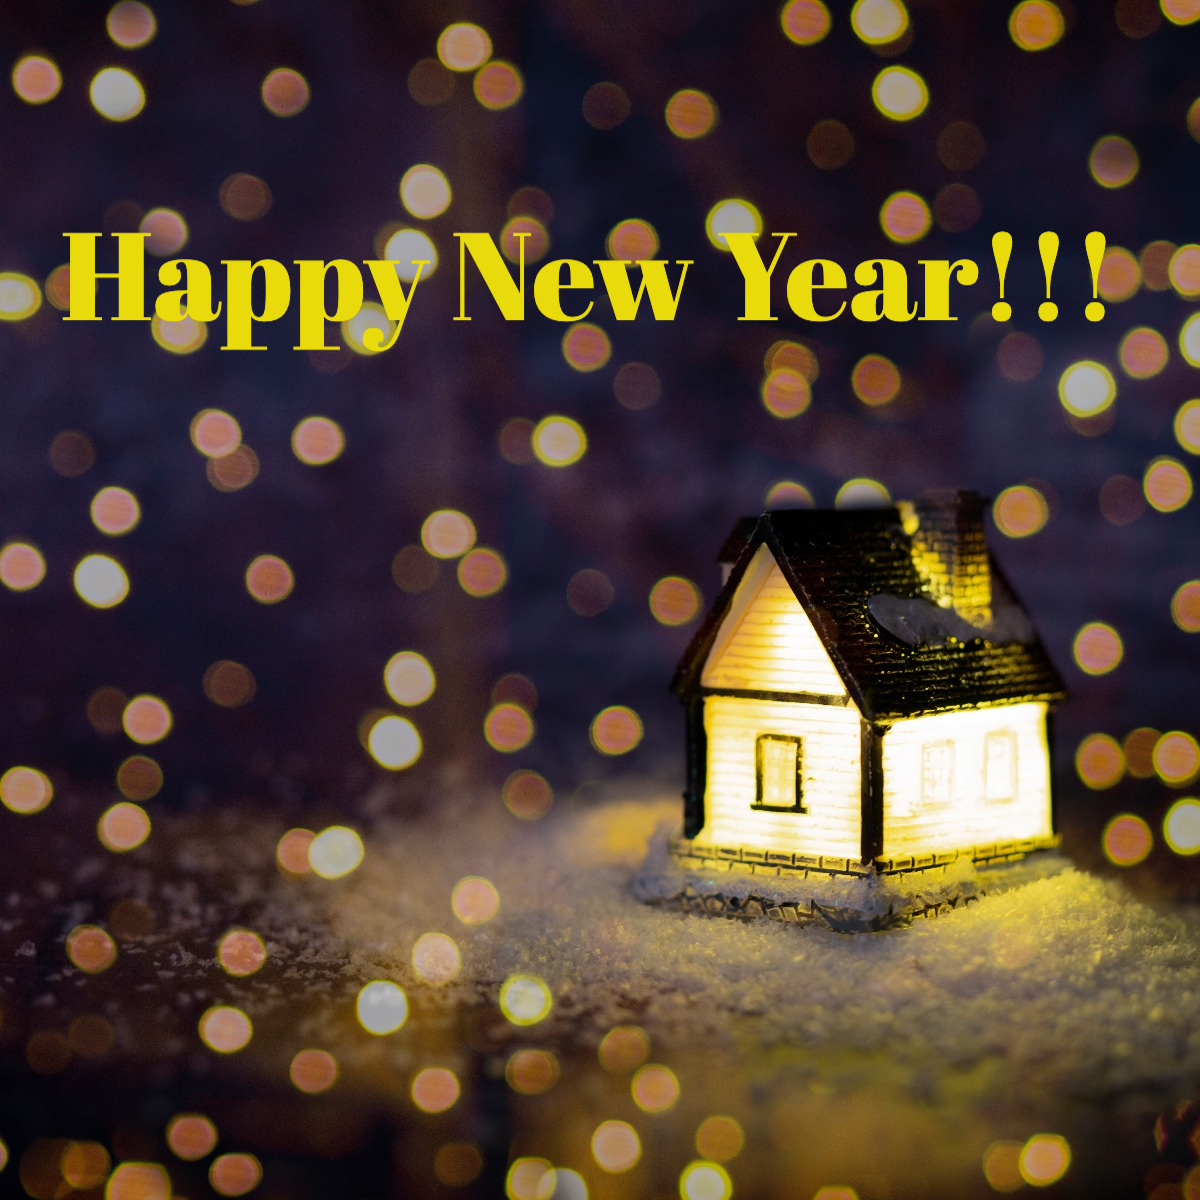 May the New Year bless you with health, wealth, and happiness. Happy New Year from THE CONDO RENTAL EXPERTS.